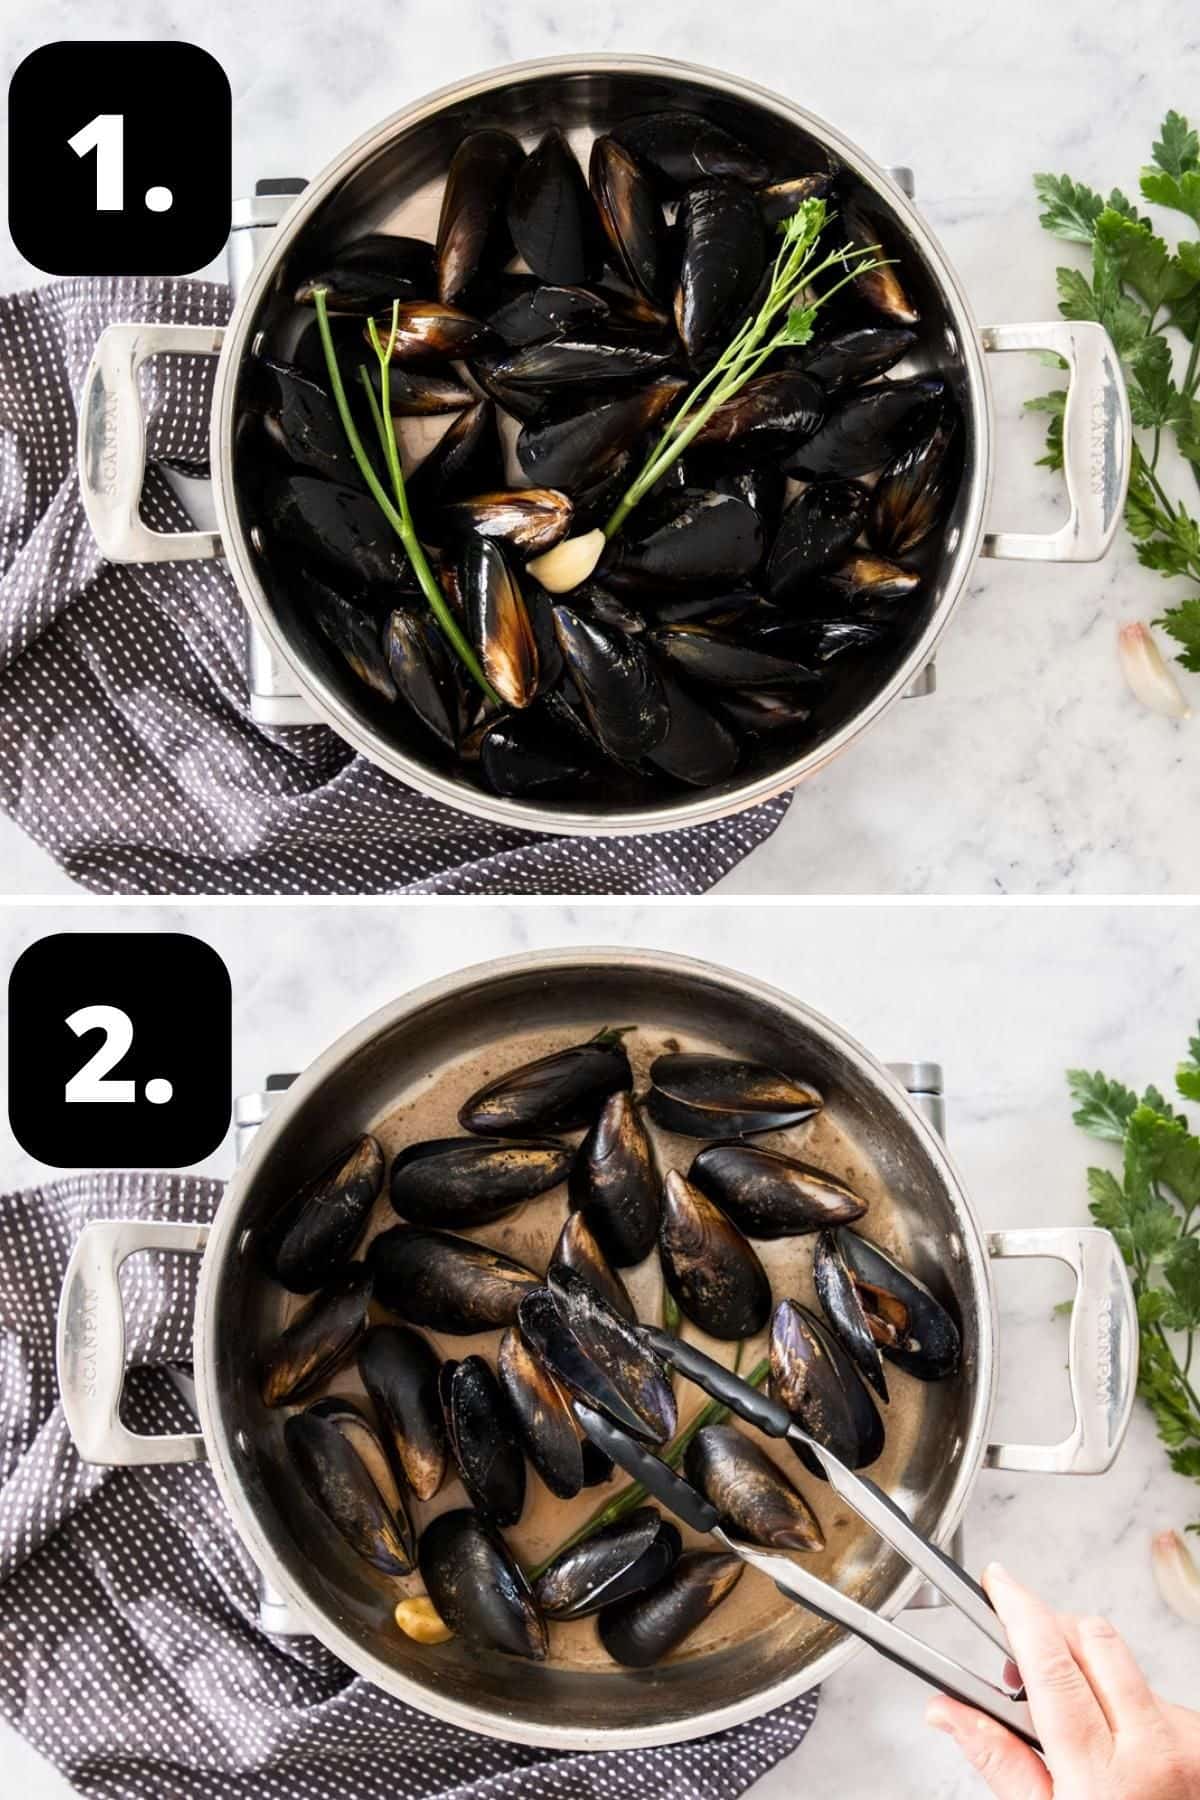 Steps 1-2 of preparing this recipe: adding the mussels to a pot and removing them once they have opened.